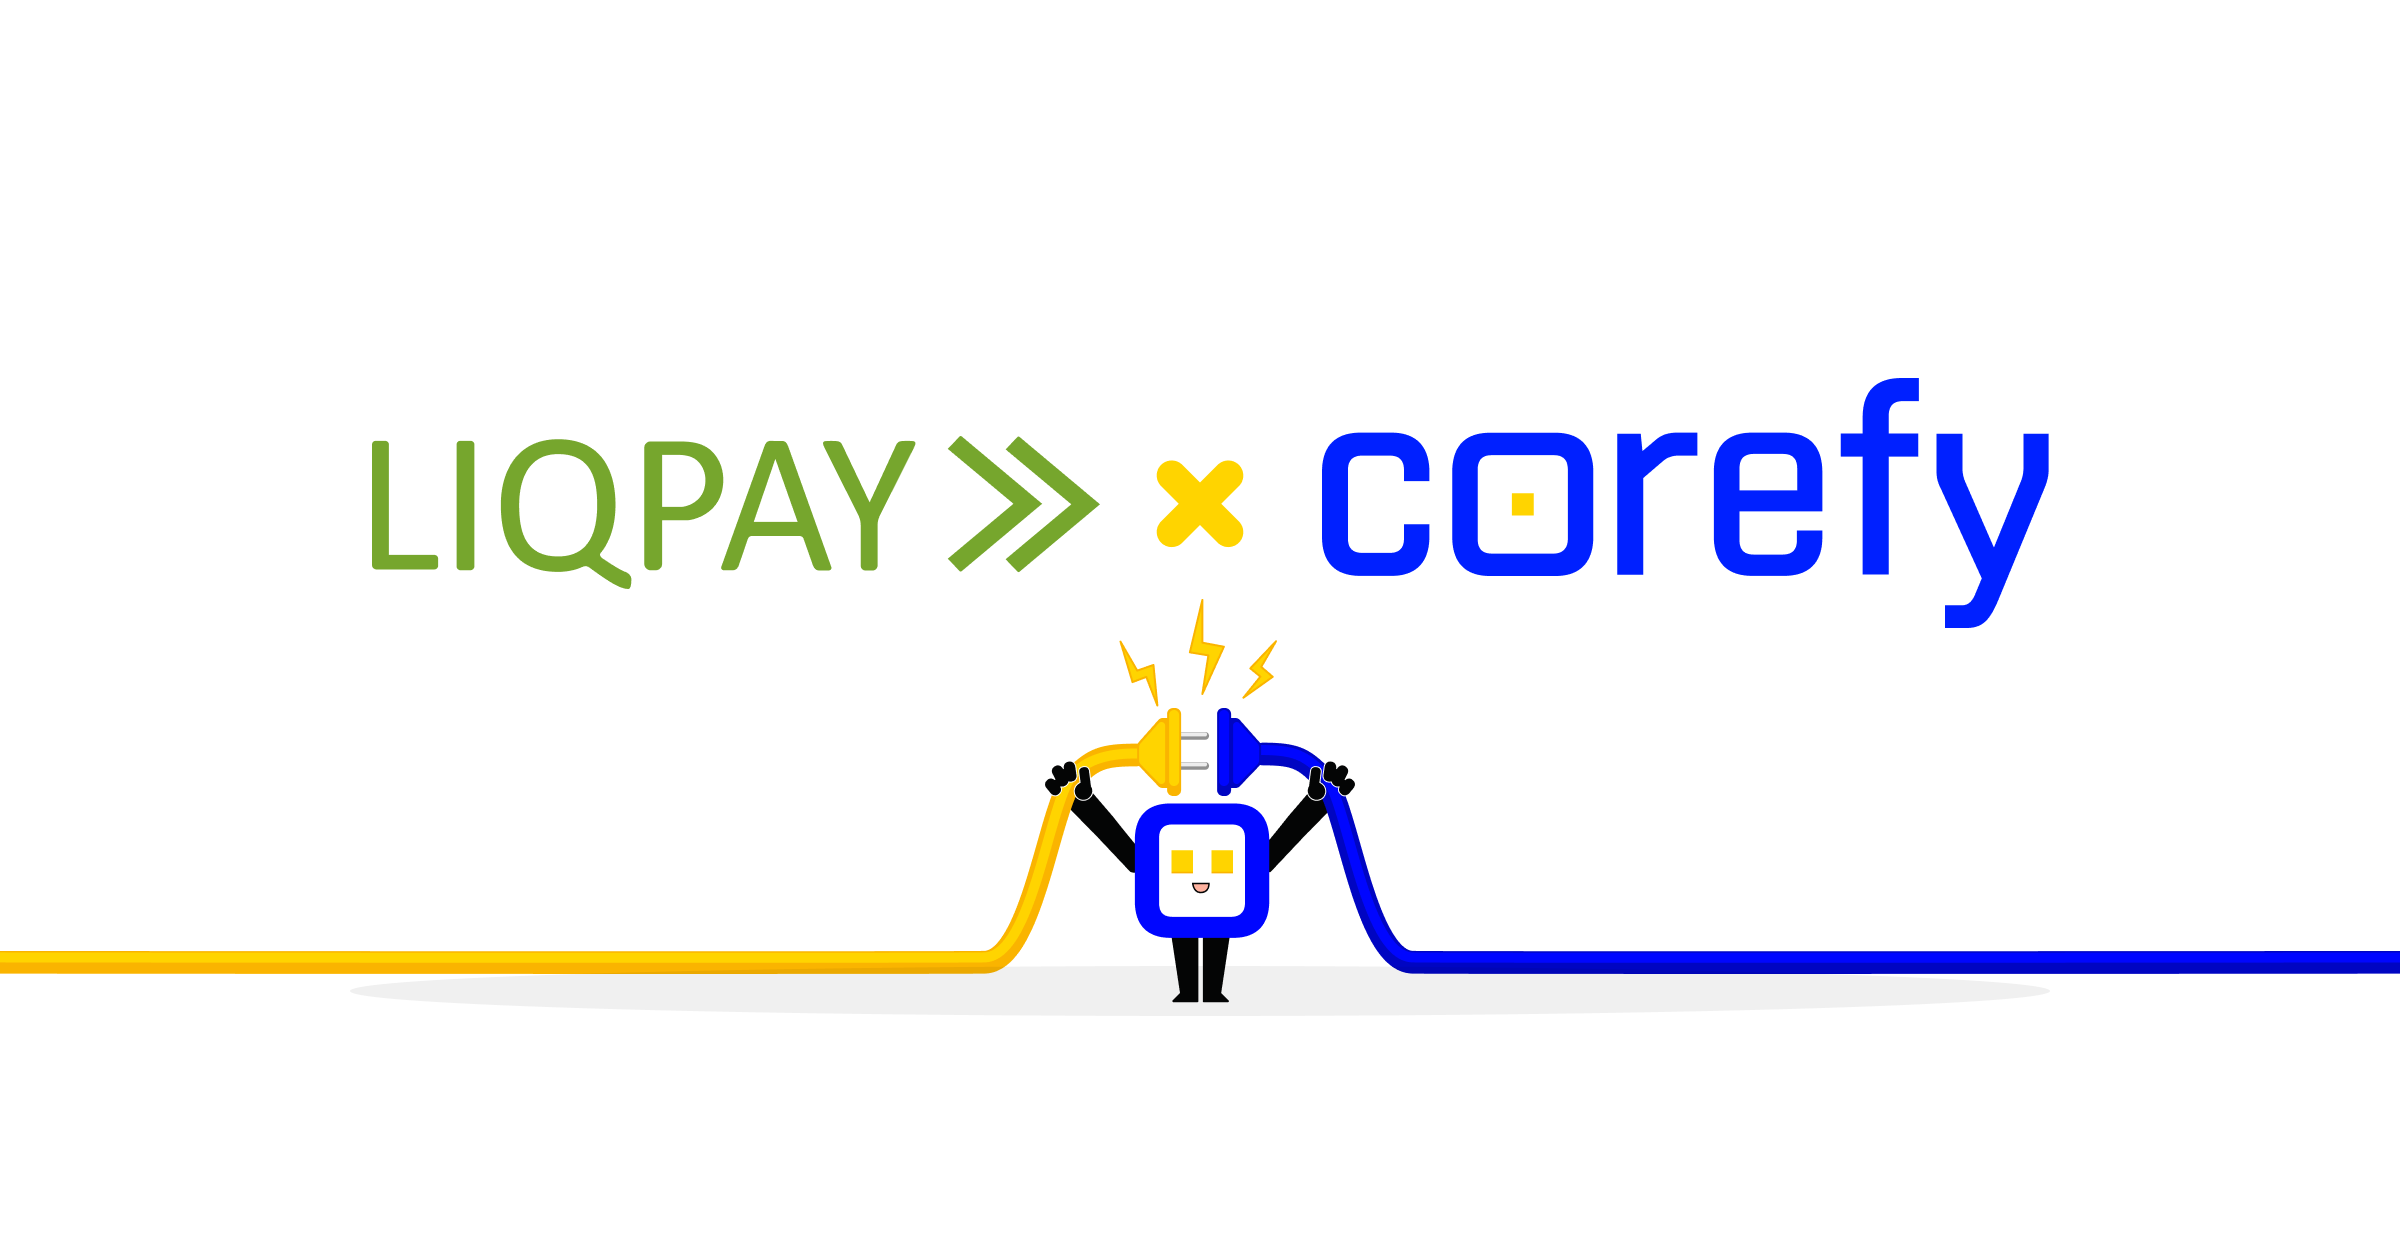 New integration with LiqPay